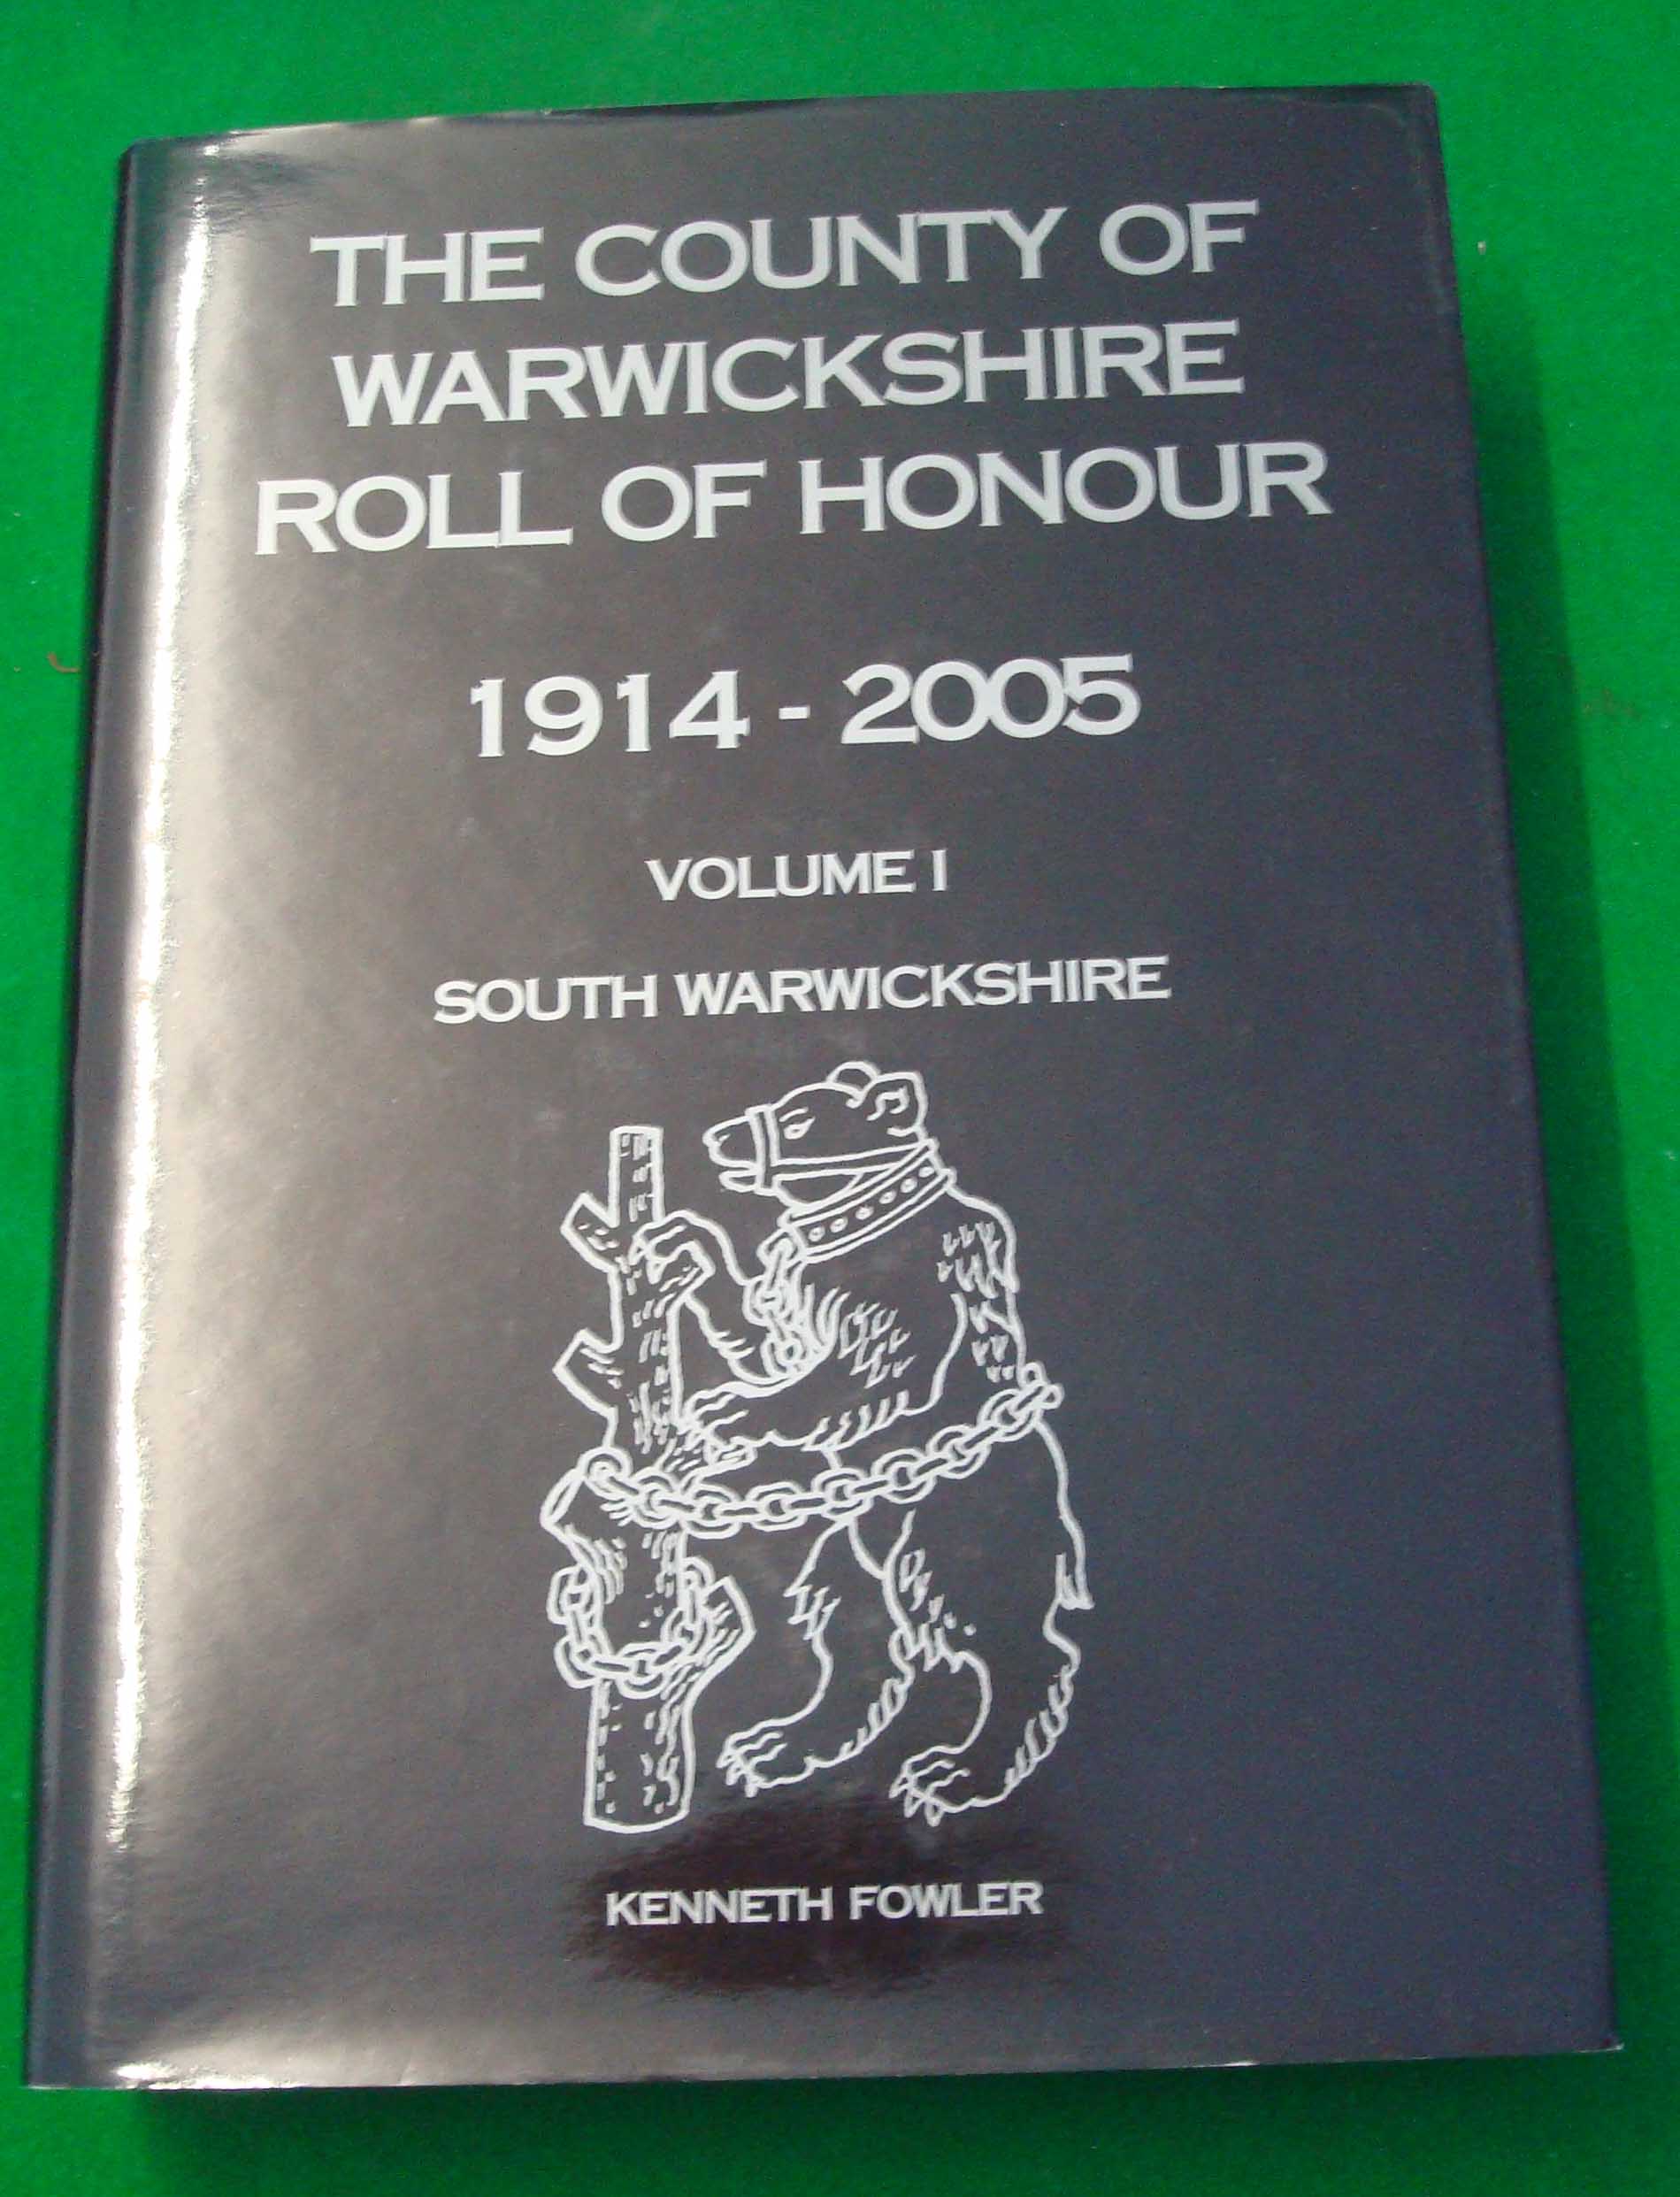 The County of Warwickshire Roll of Honour 1914 – 2005: Volume 1 South Warwickshire by Ken Fowler